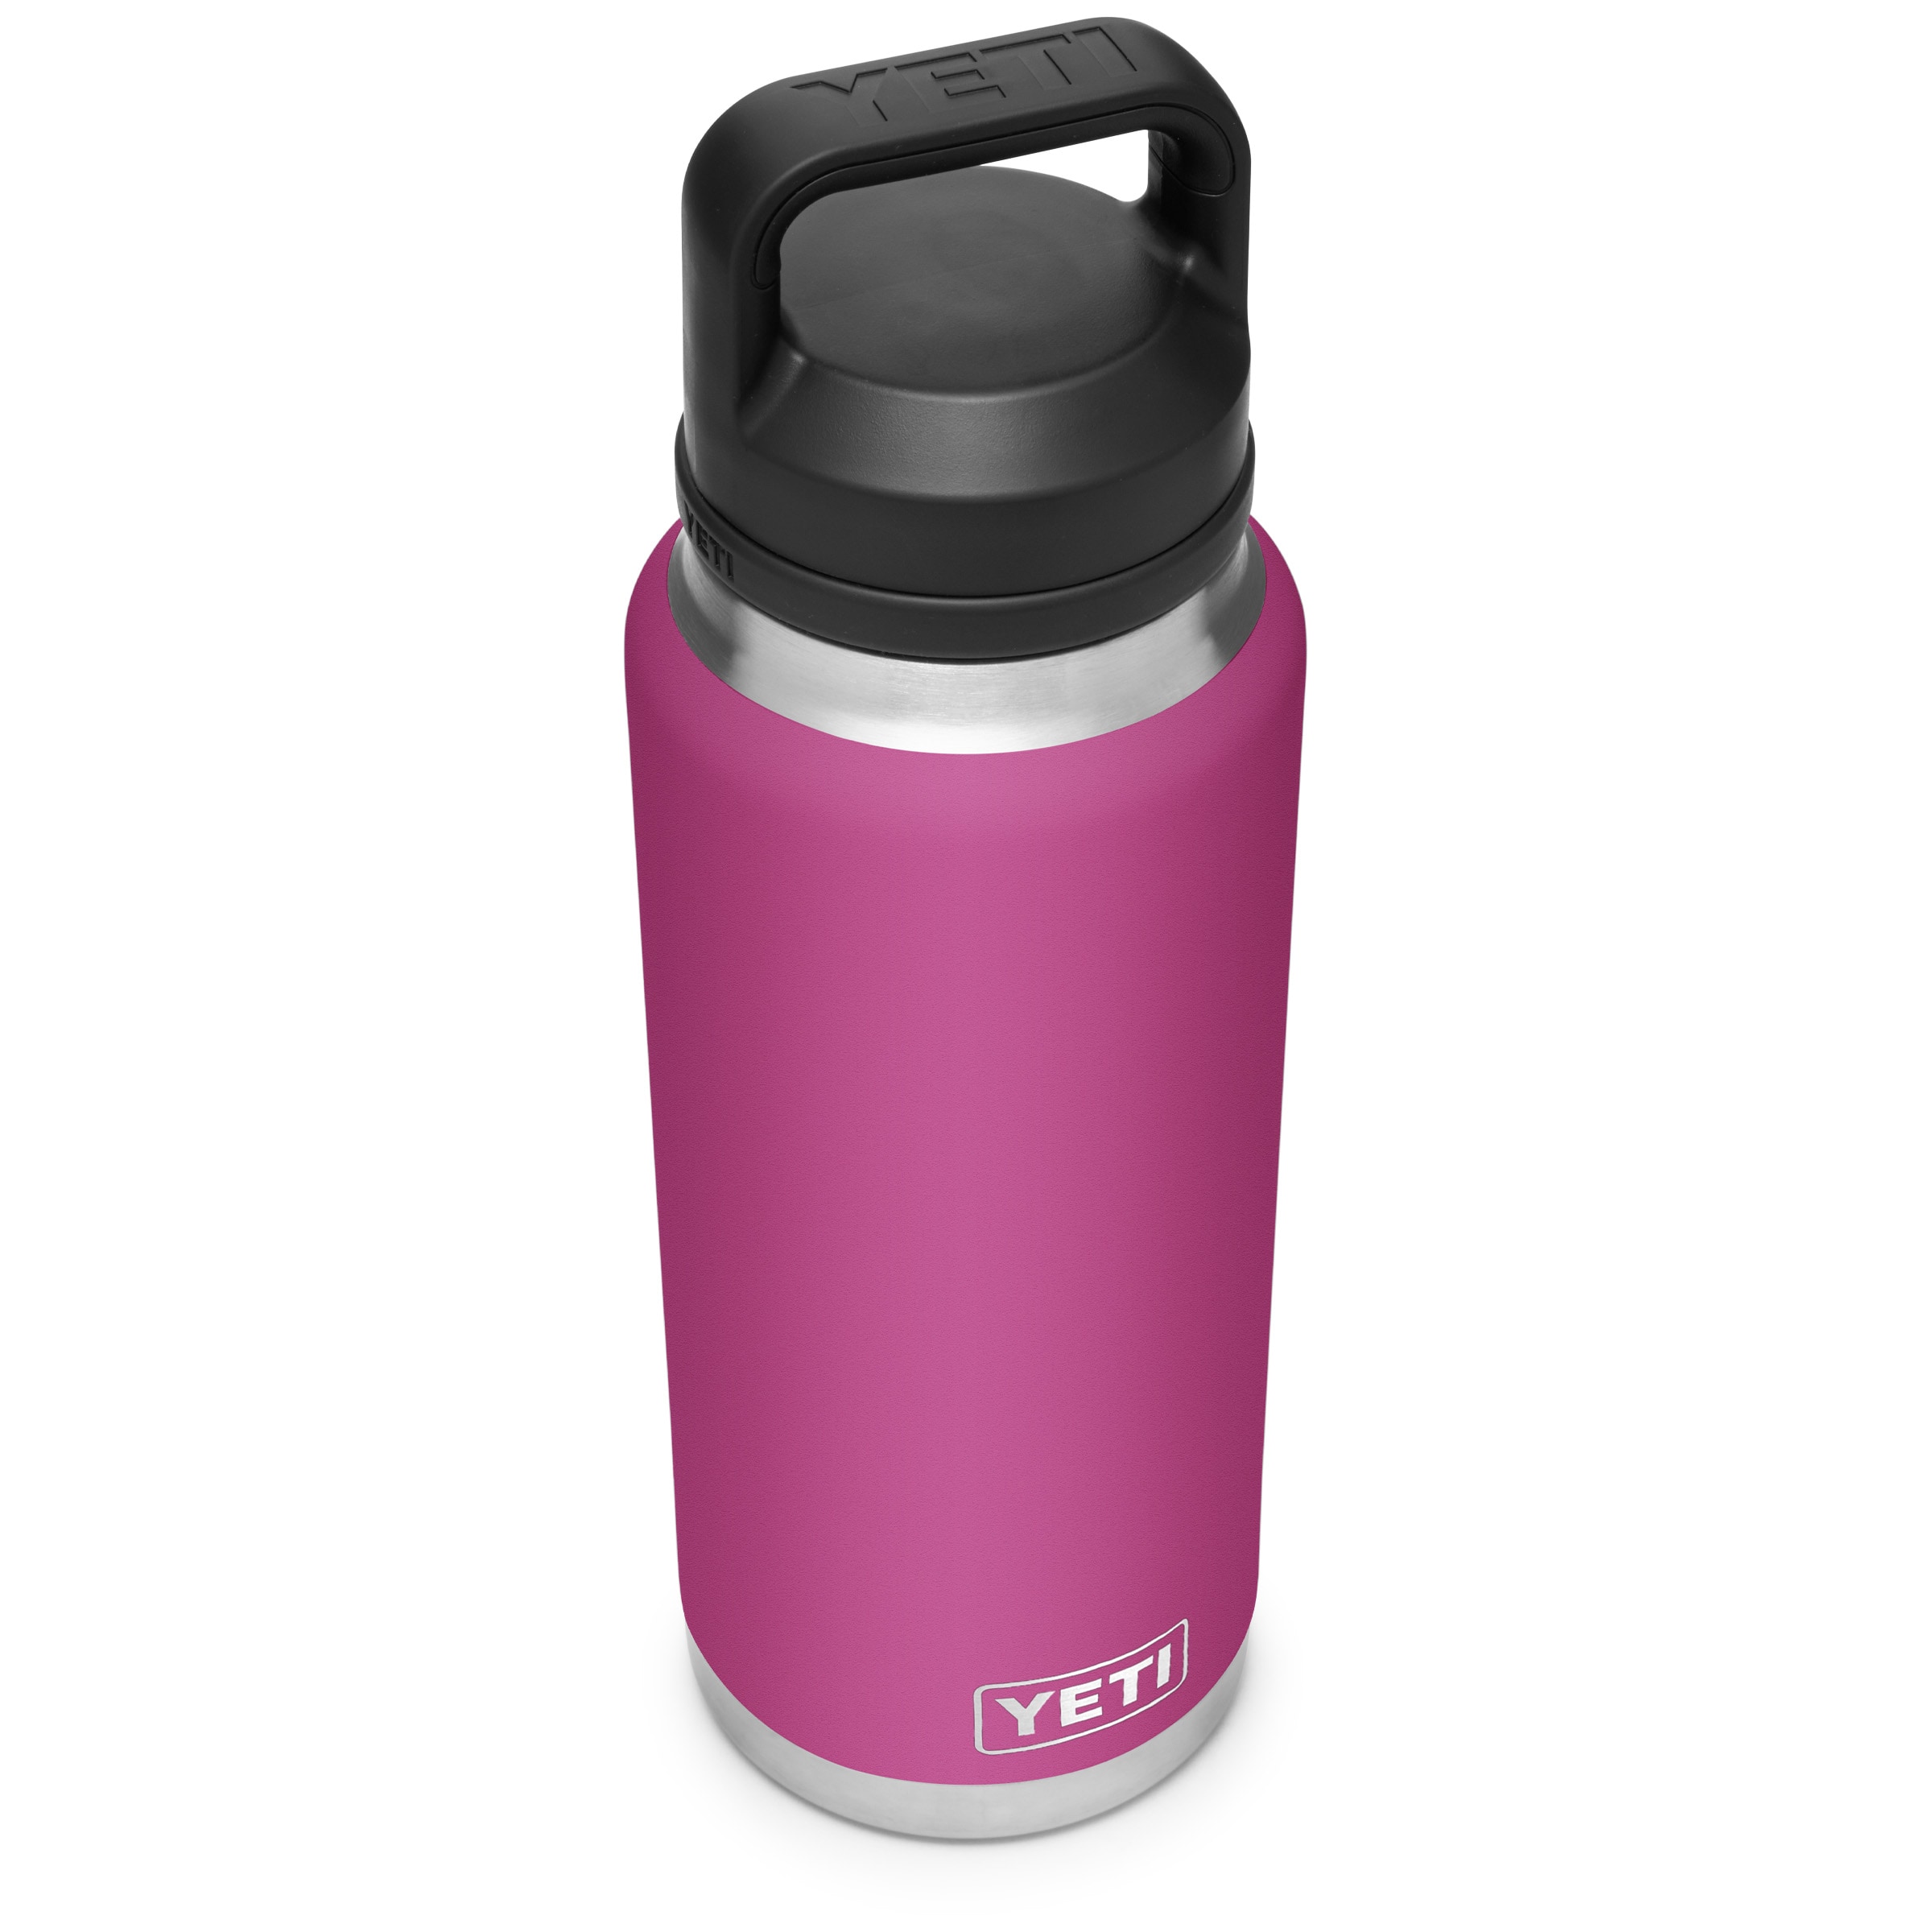 YETI Rambler 36 oz Bottle Retired Color, Vacuum Insulated, Stainless Steel  with Chug Cap, Sandstone Pink